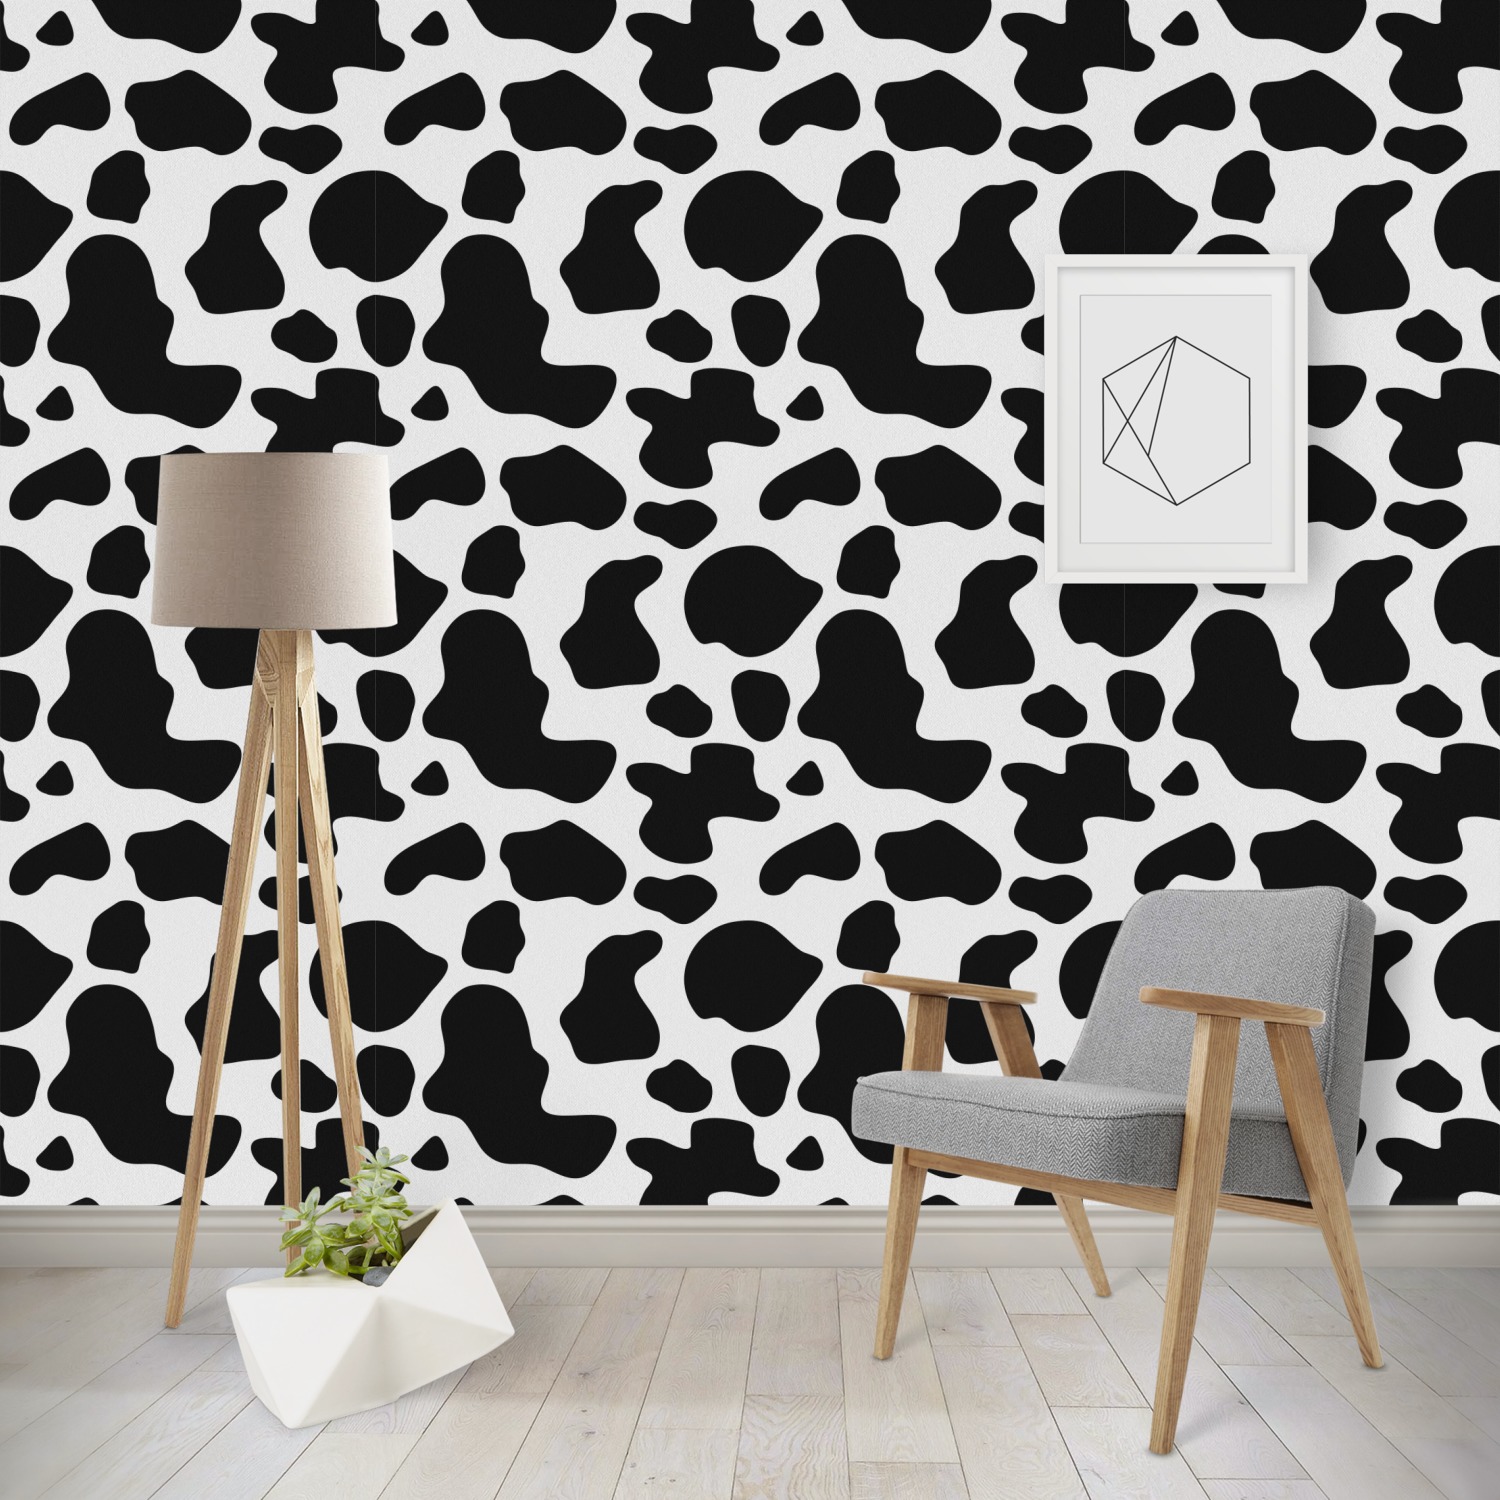 Custom Cowprint Cowgirl Wallpaper  Surface Covering  YouCustomizeIt